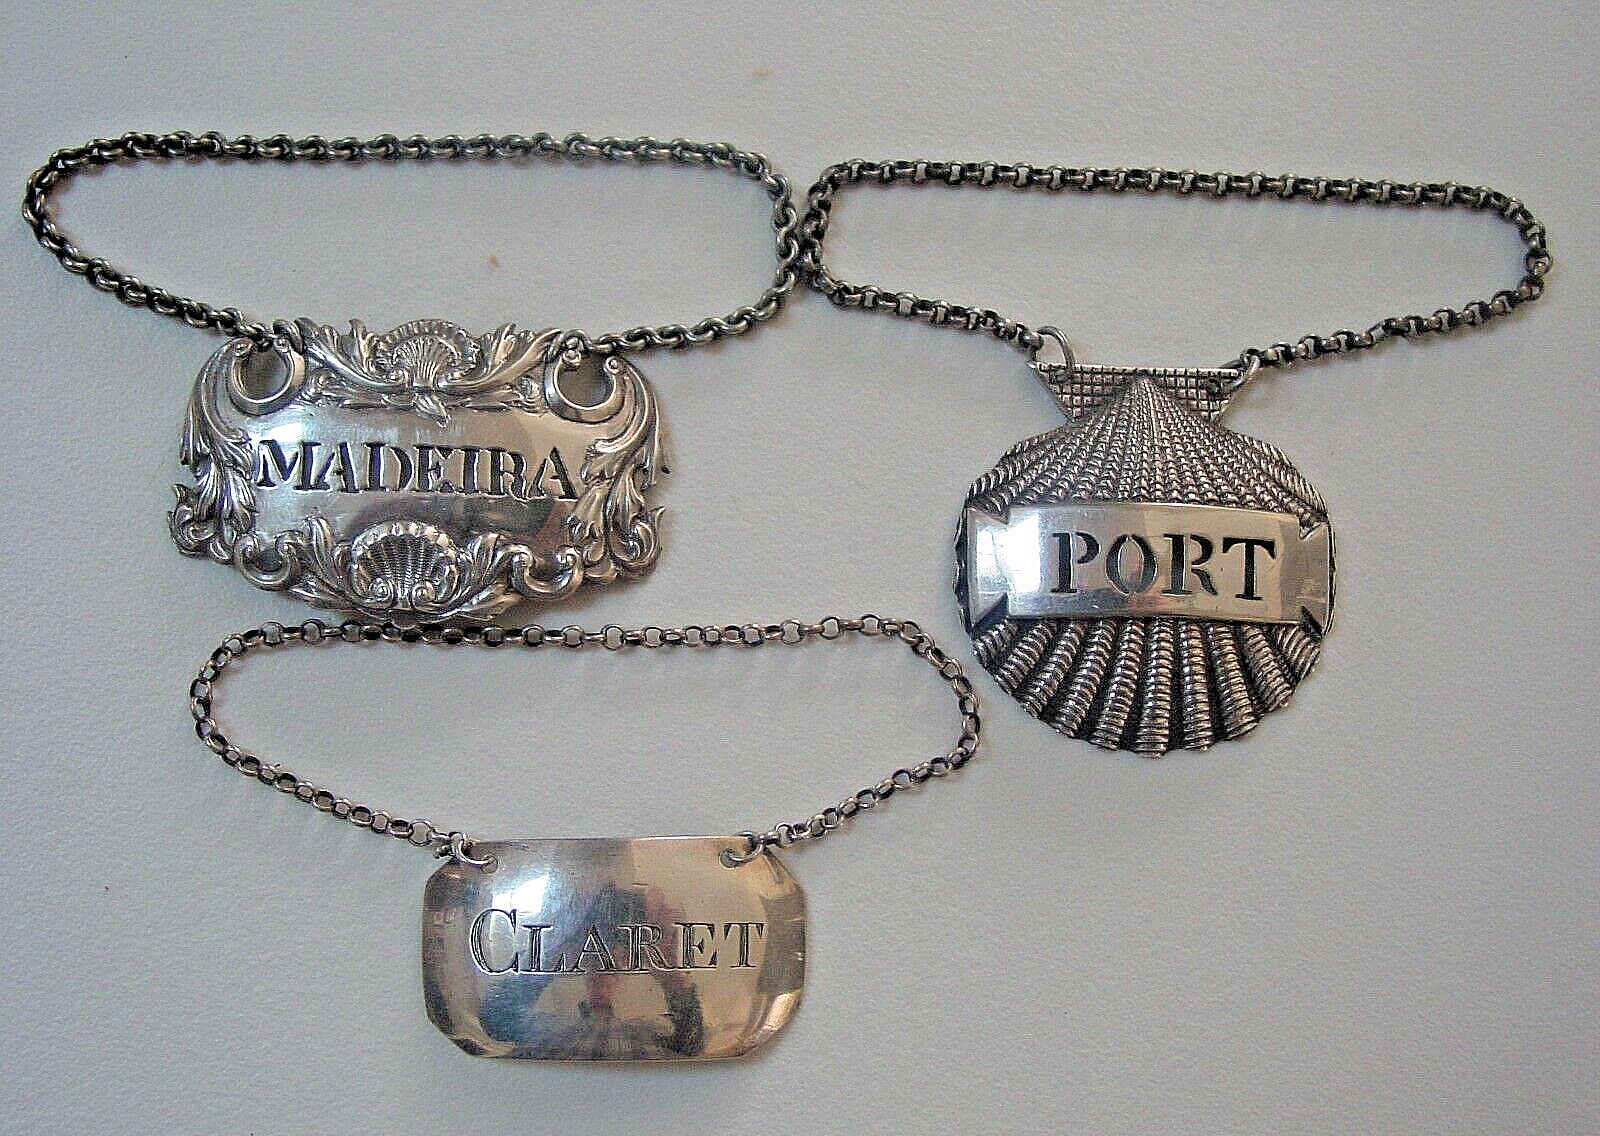 3 sterling silver decanter labels MADEIRA, PORT, CLARET. 18th. - 19th. century.